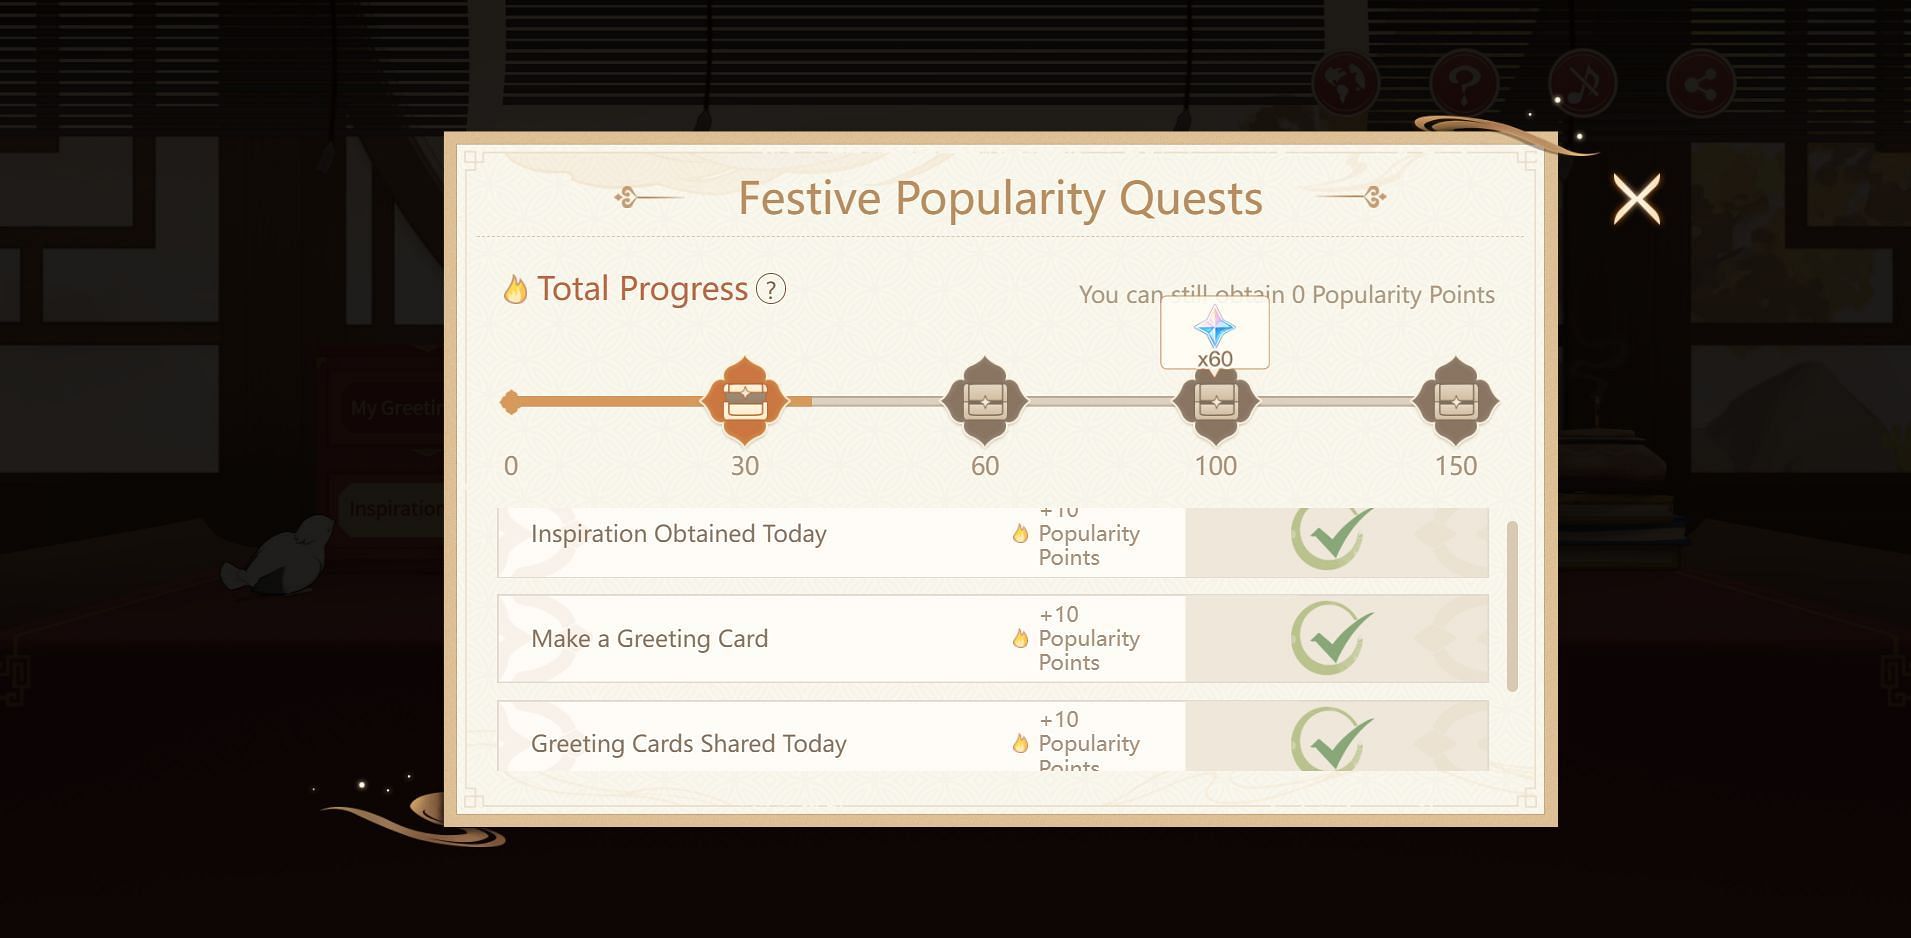 Complete tasks to get popularity points (Image via Genshin Impact)